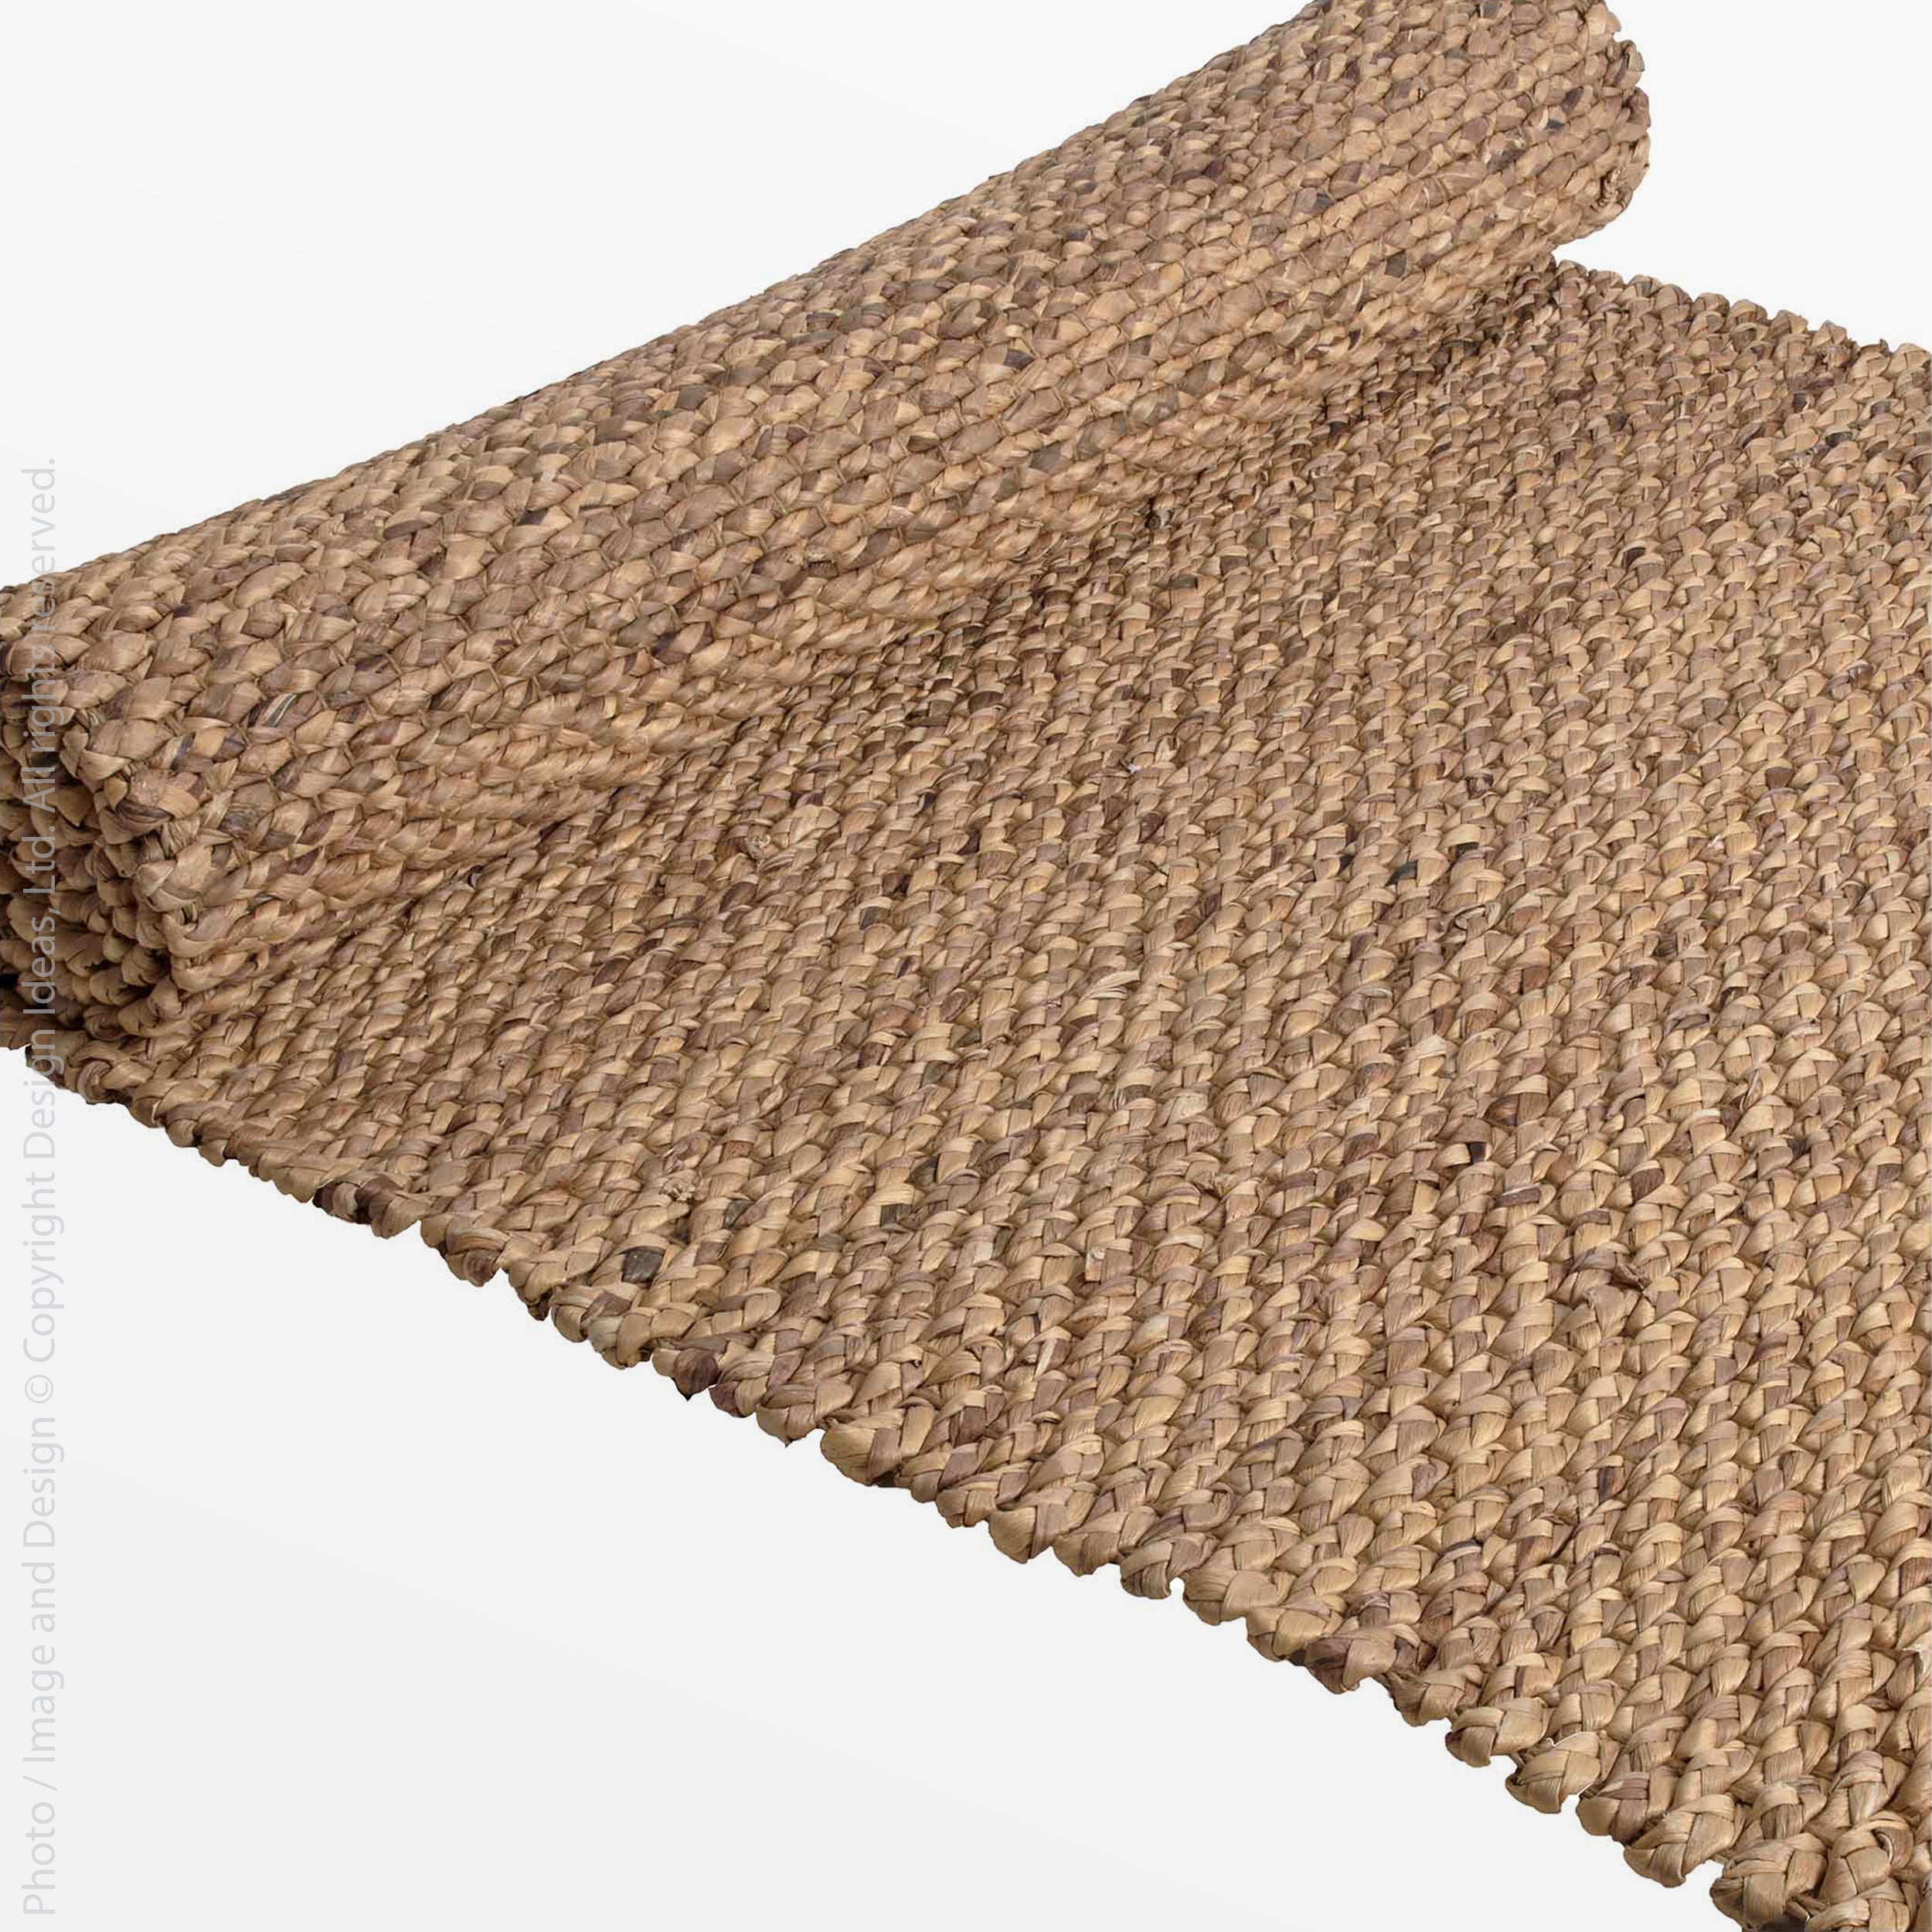 Trieste™ rug (60x96in.) - Natural | Image 3 | Premium Rug from the Trieste collection | made with Water Hyacinth Twine for long lasting use | texxture